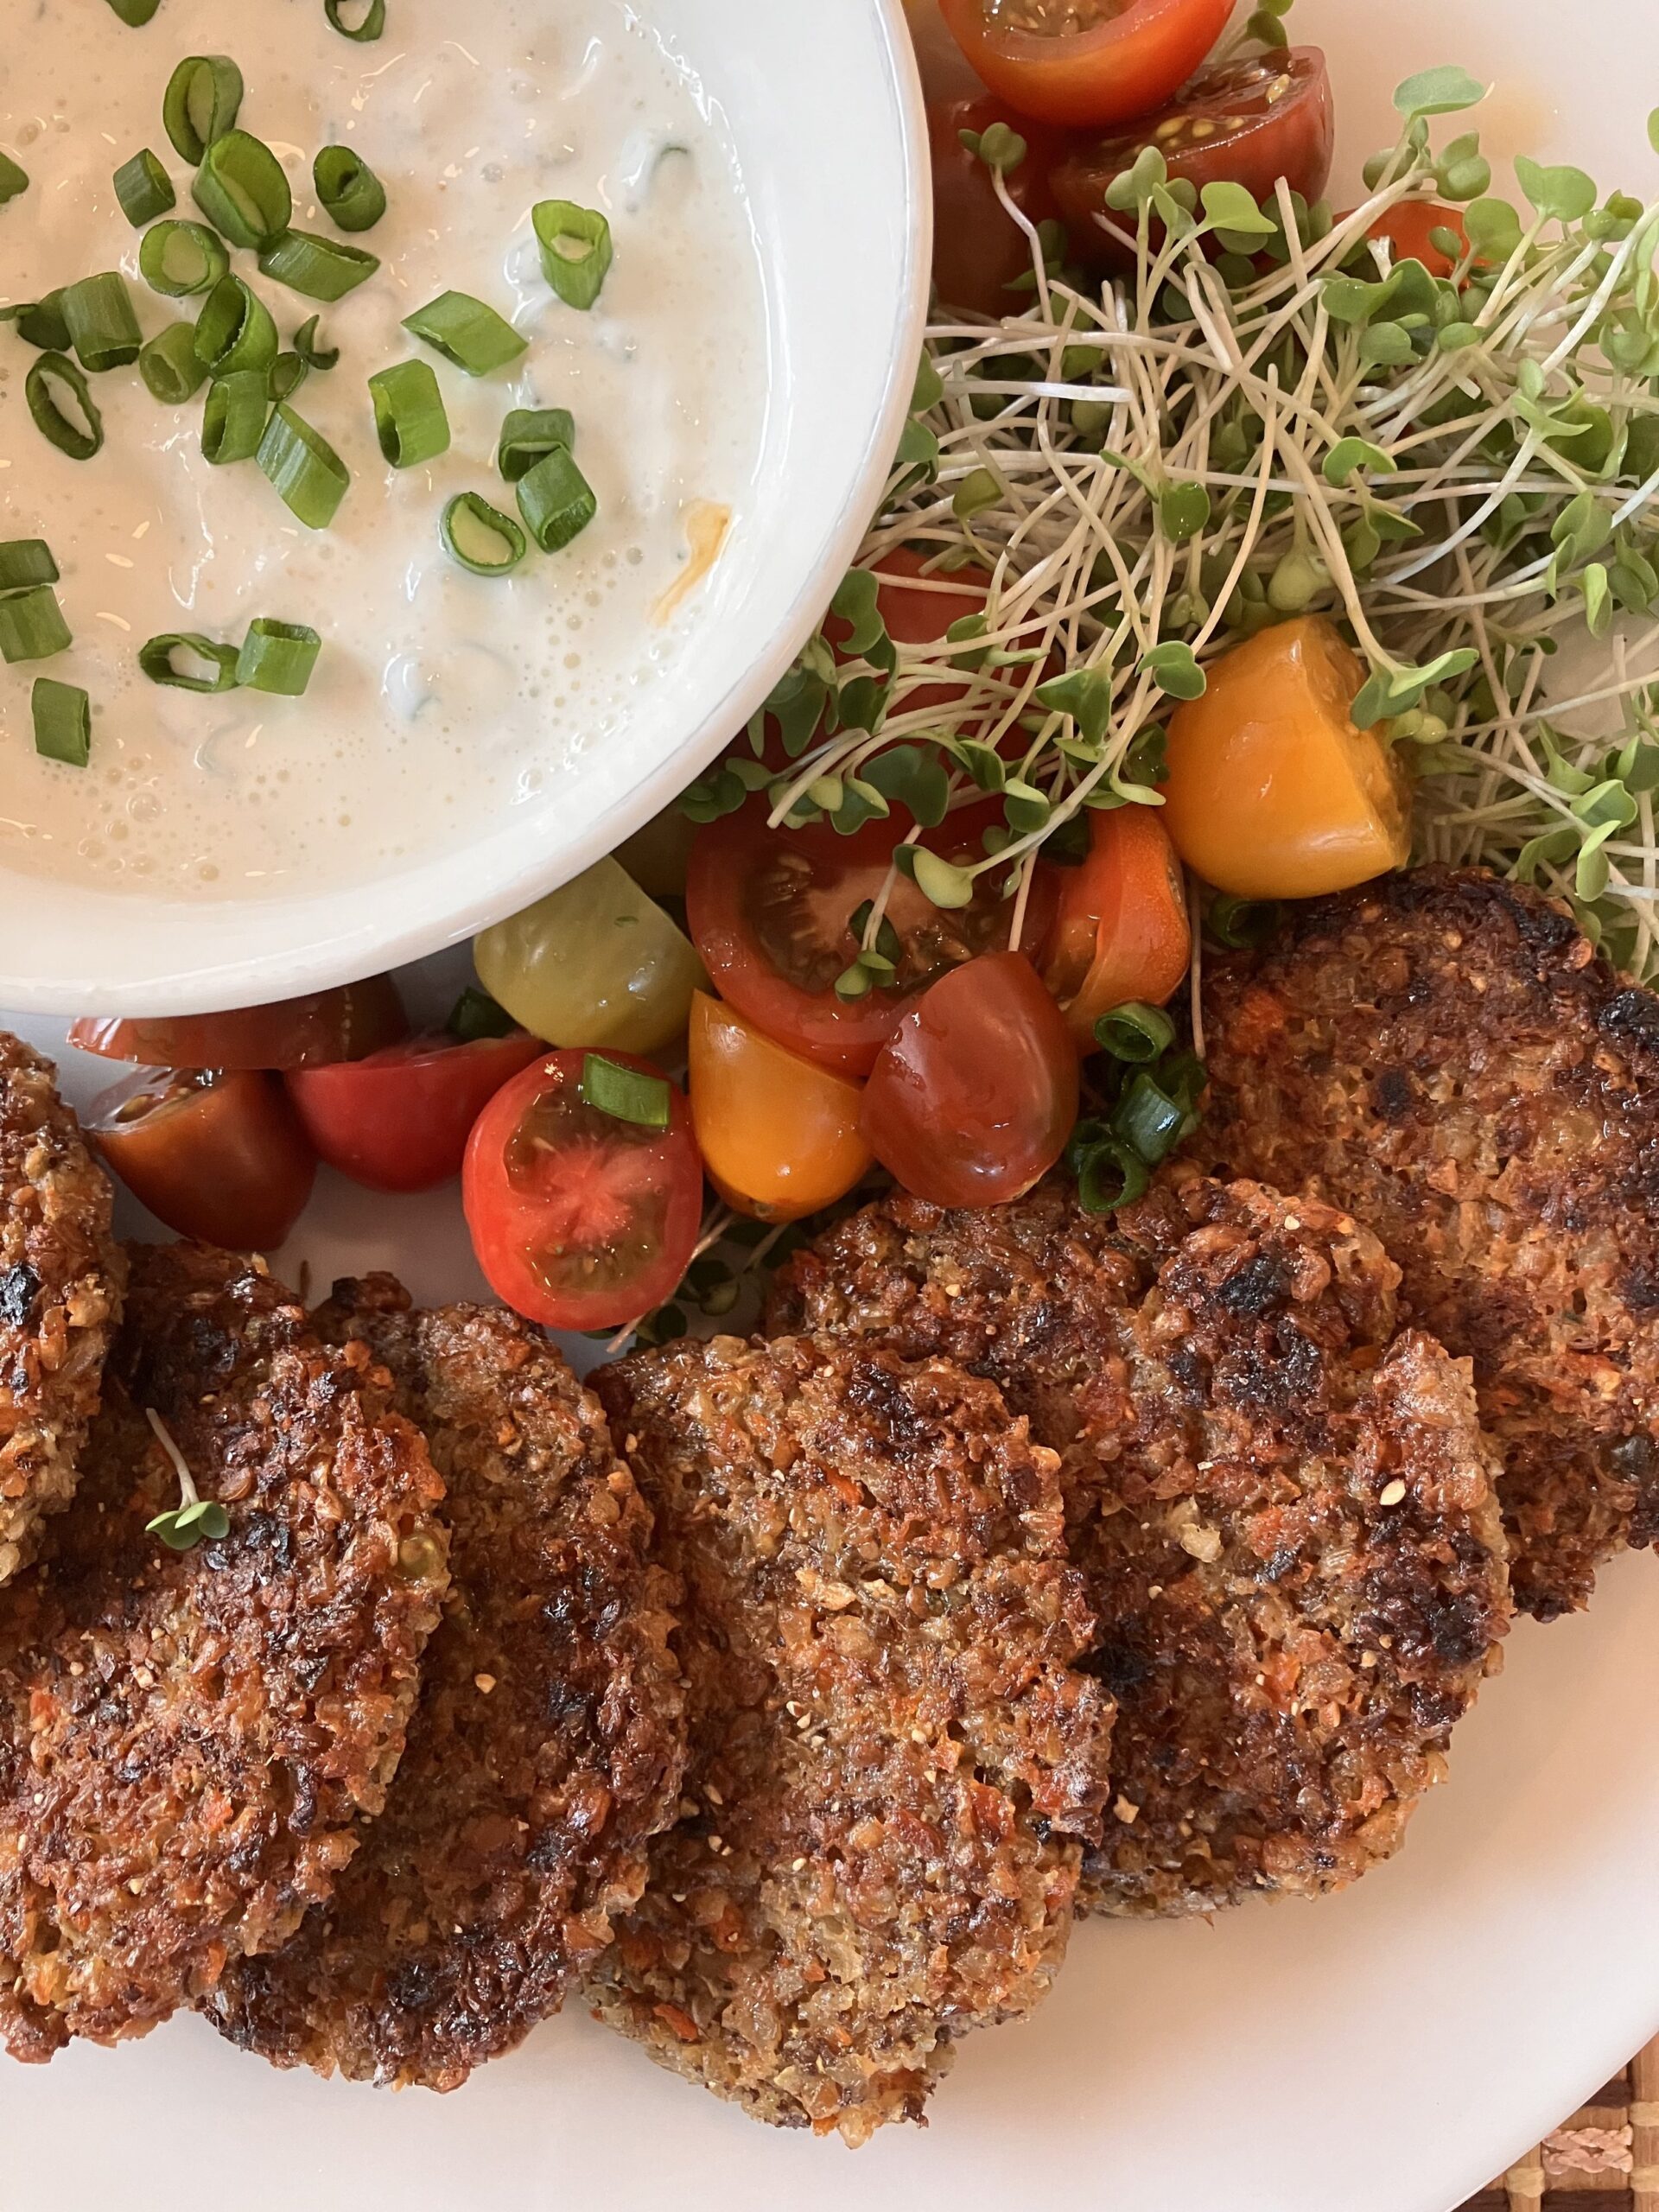 Lentil Fritters, with sour cream dipping sauce, cherry tomatoes, and microgreens